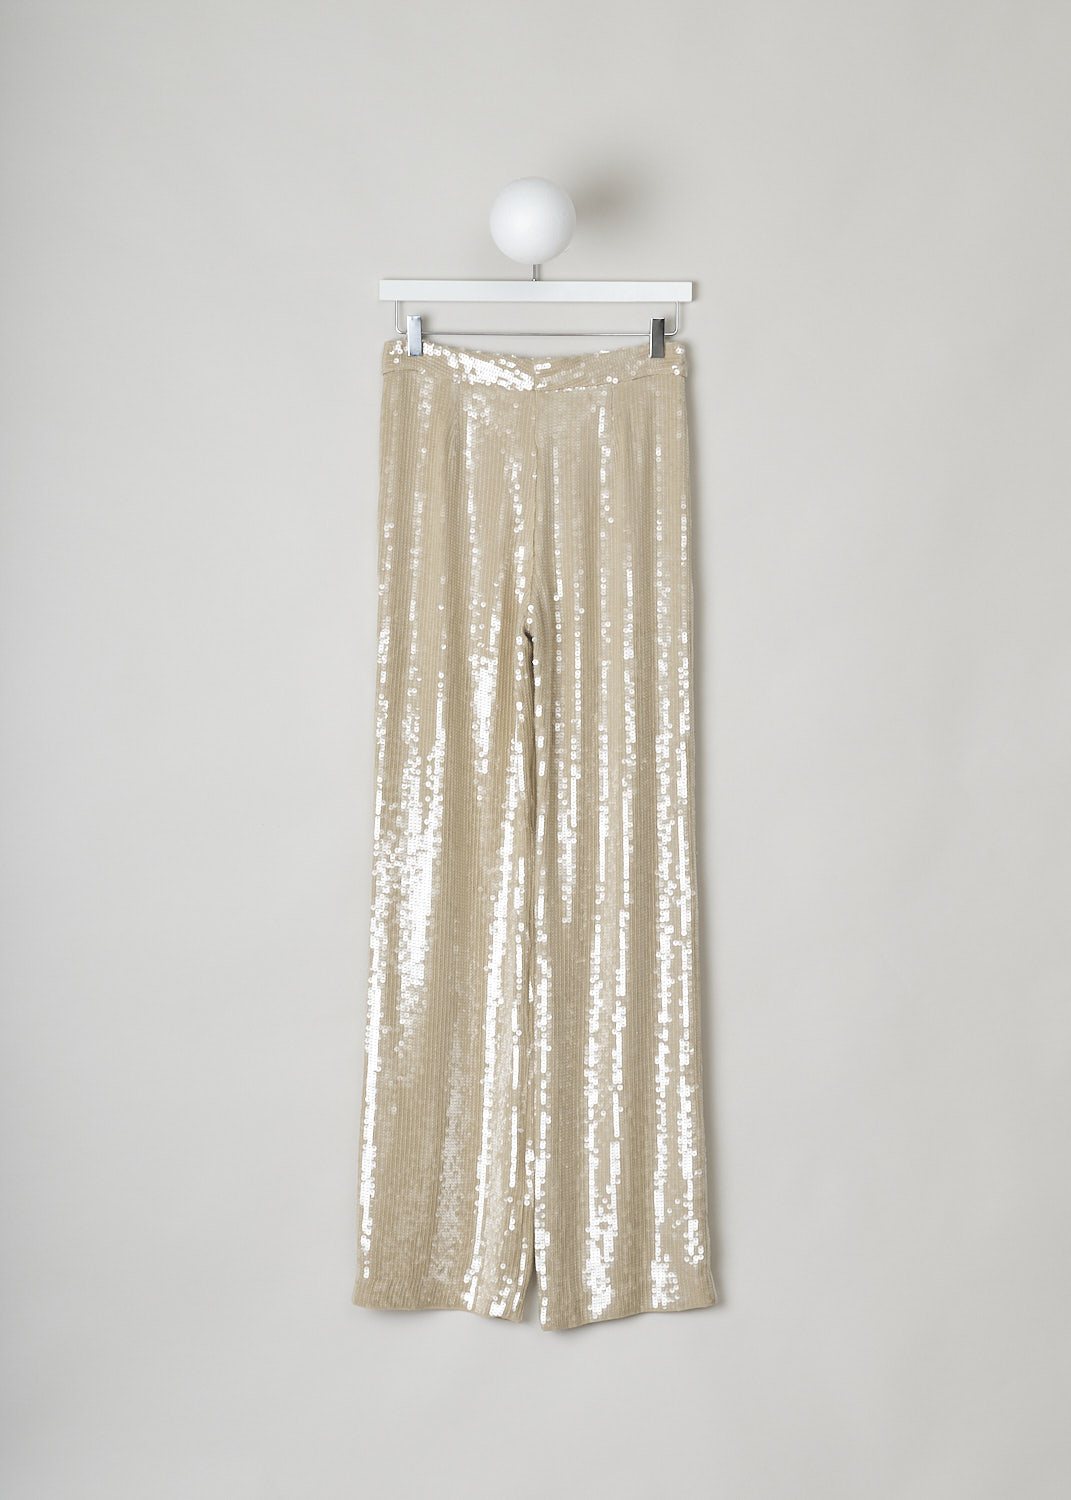 NILI LOTAN, KHAKI COLORED SEQUIN PANTS, 12186_W688_KHAKI, Back, Beige, These khaki colored pants are fully covered with see-through sequin. A concealed clasp and zip functions as the closure option. These pants have straight pant legs and are fully lined. 
